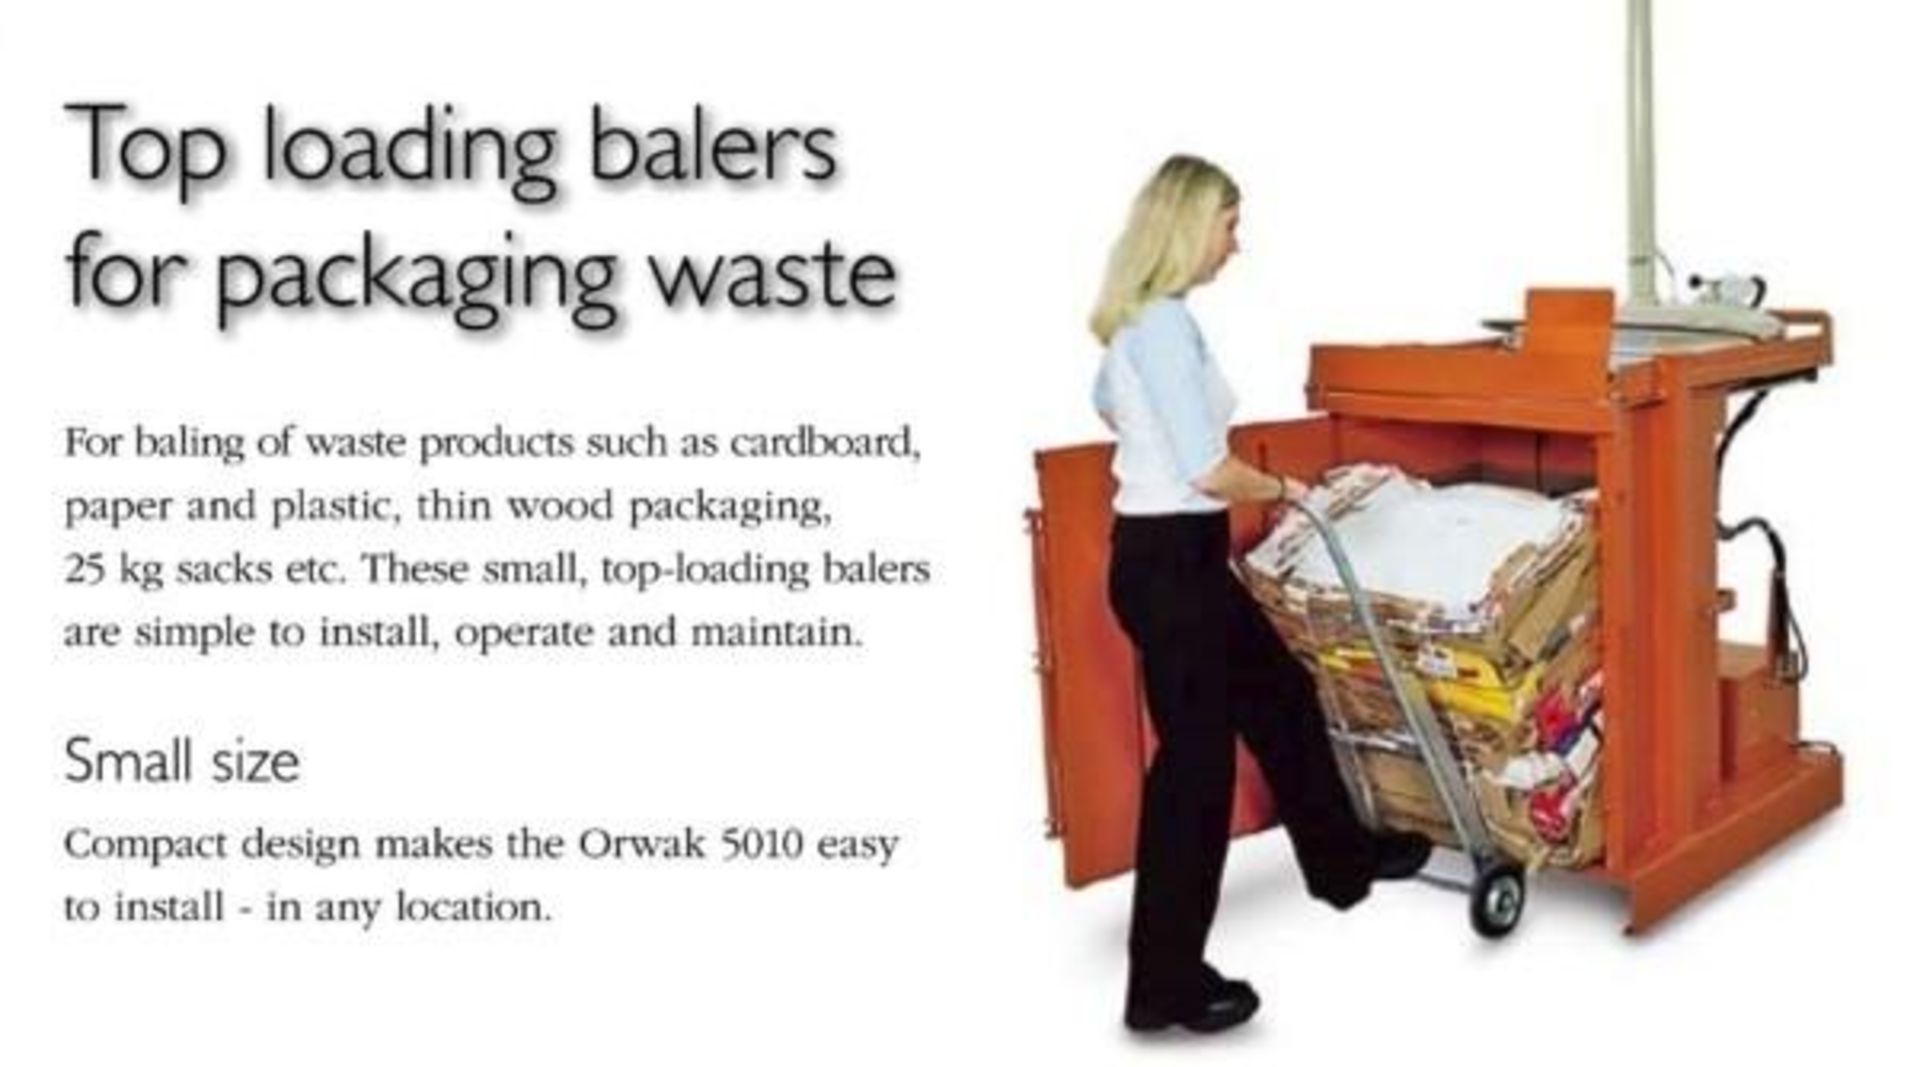 1 x Orwak 5010 Top Loading Baler -  Fully Tested and Working, Very Good Condition - CL011 - Location - Image 2 of 11